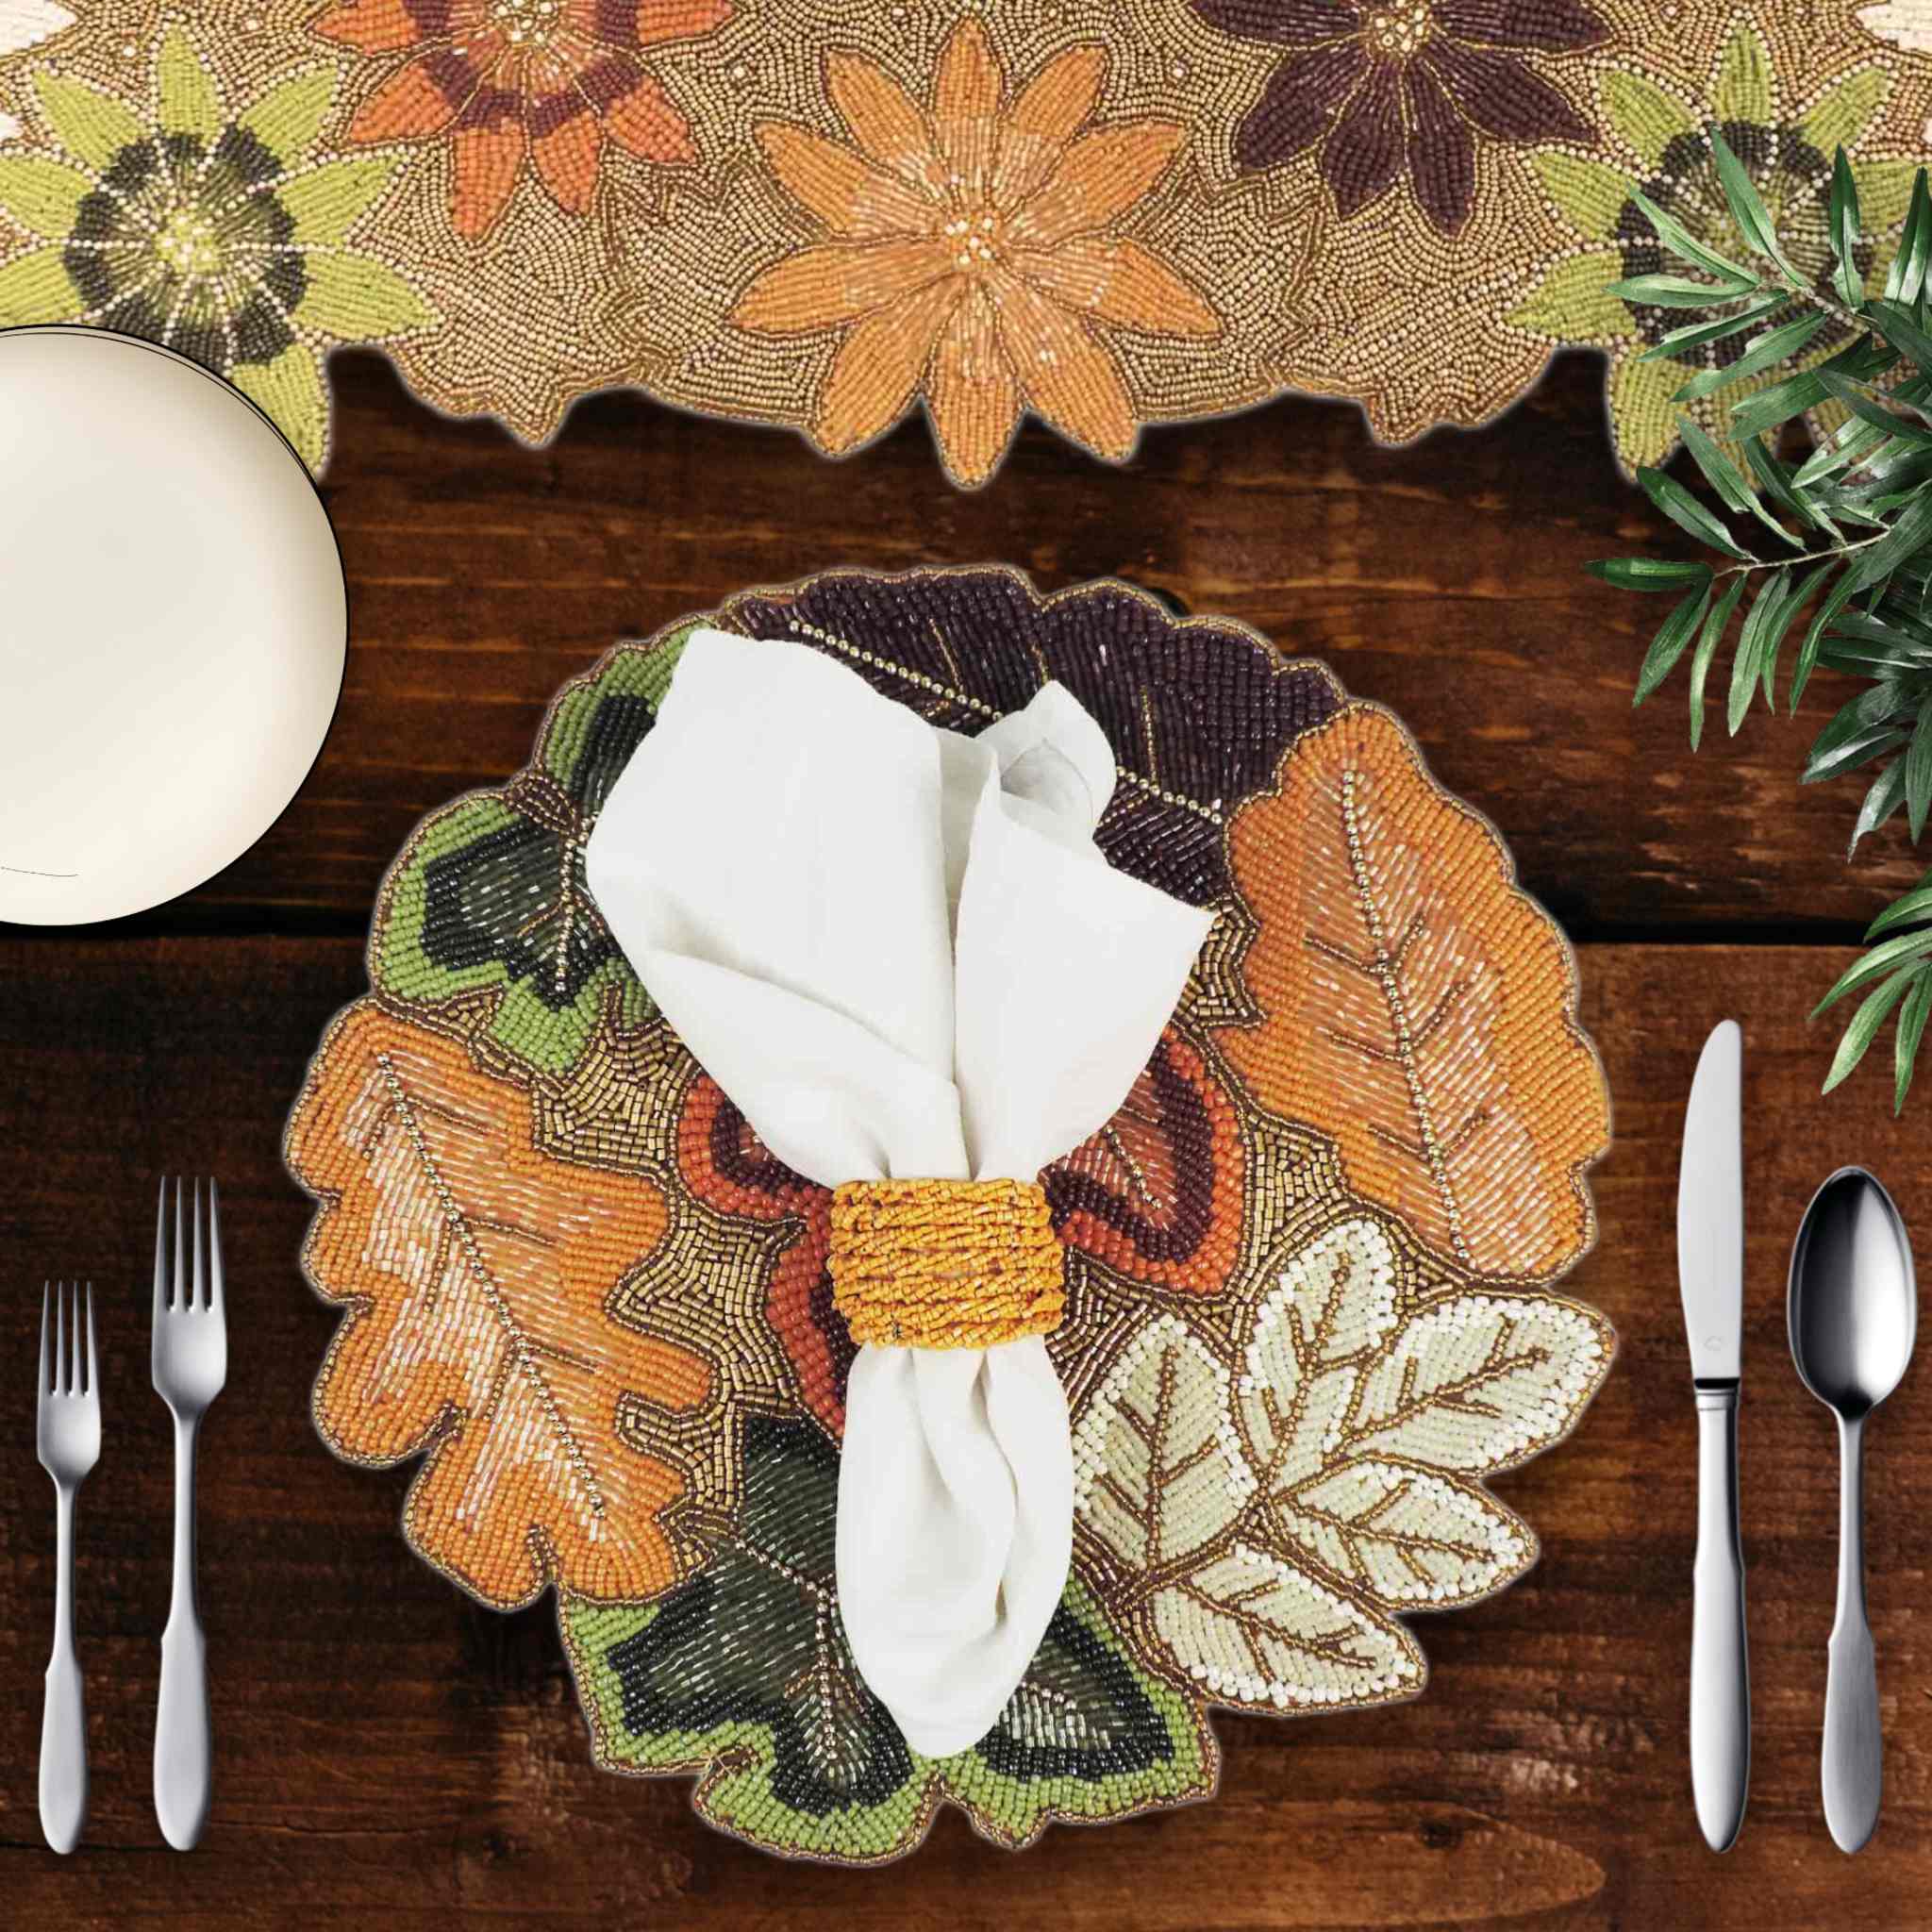 Autumnal Bead Table Setting for 4 - Embroidered Placemats, Napkin Rings & Table Runner in Orange & Green